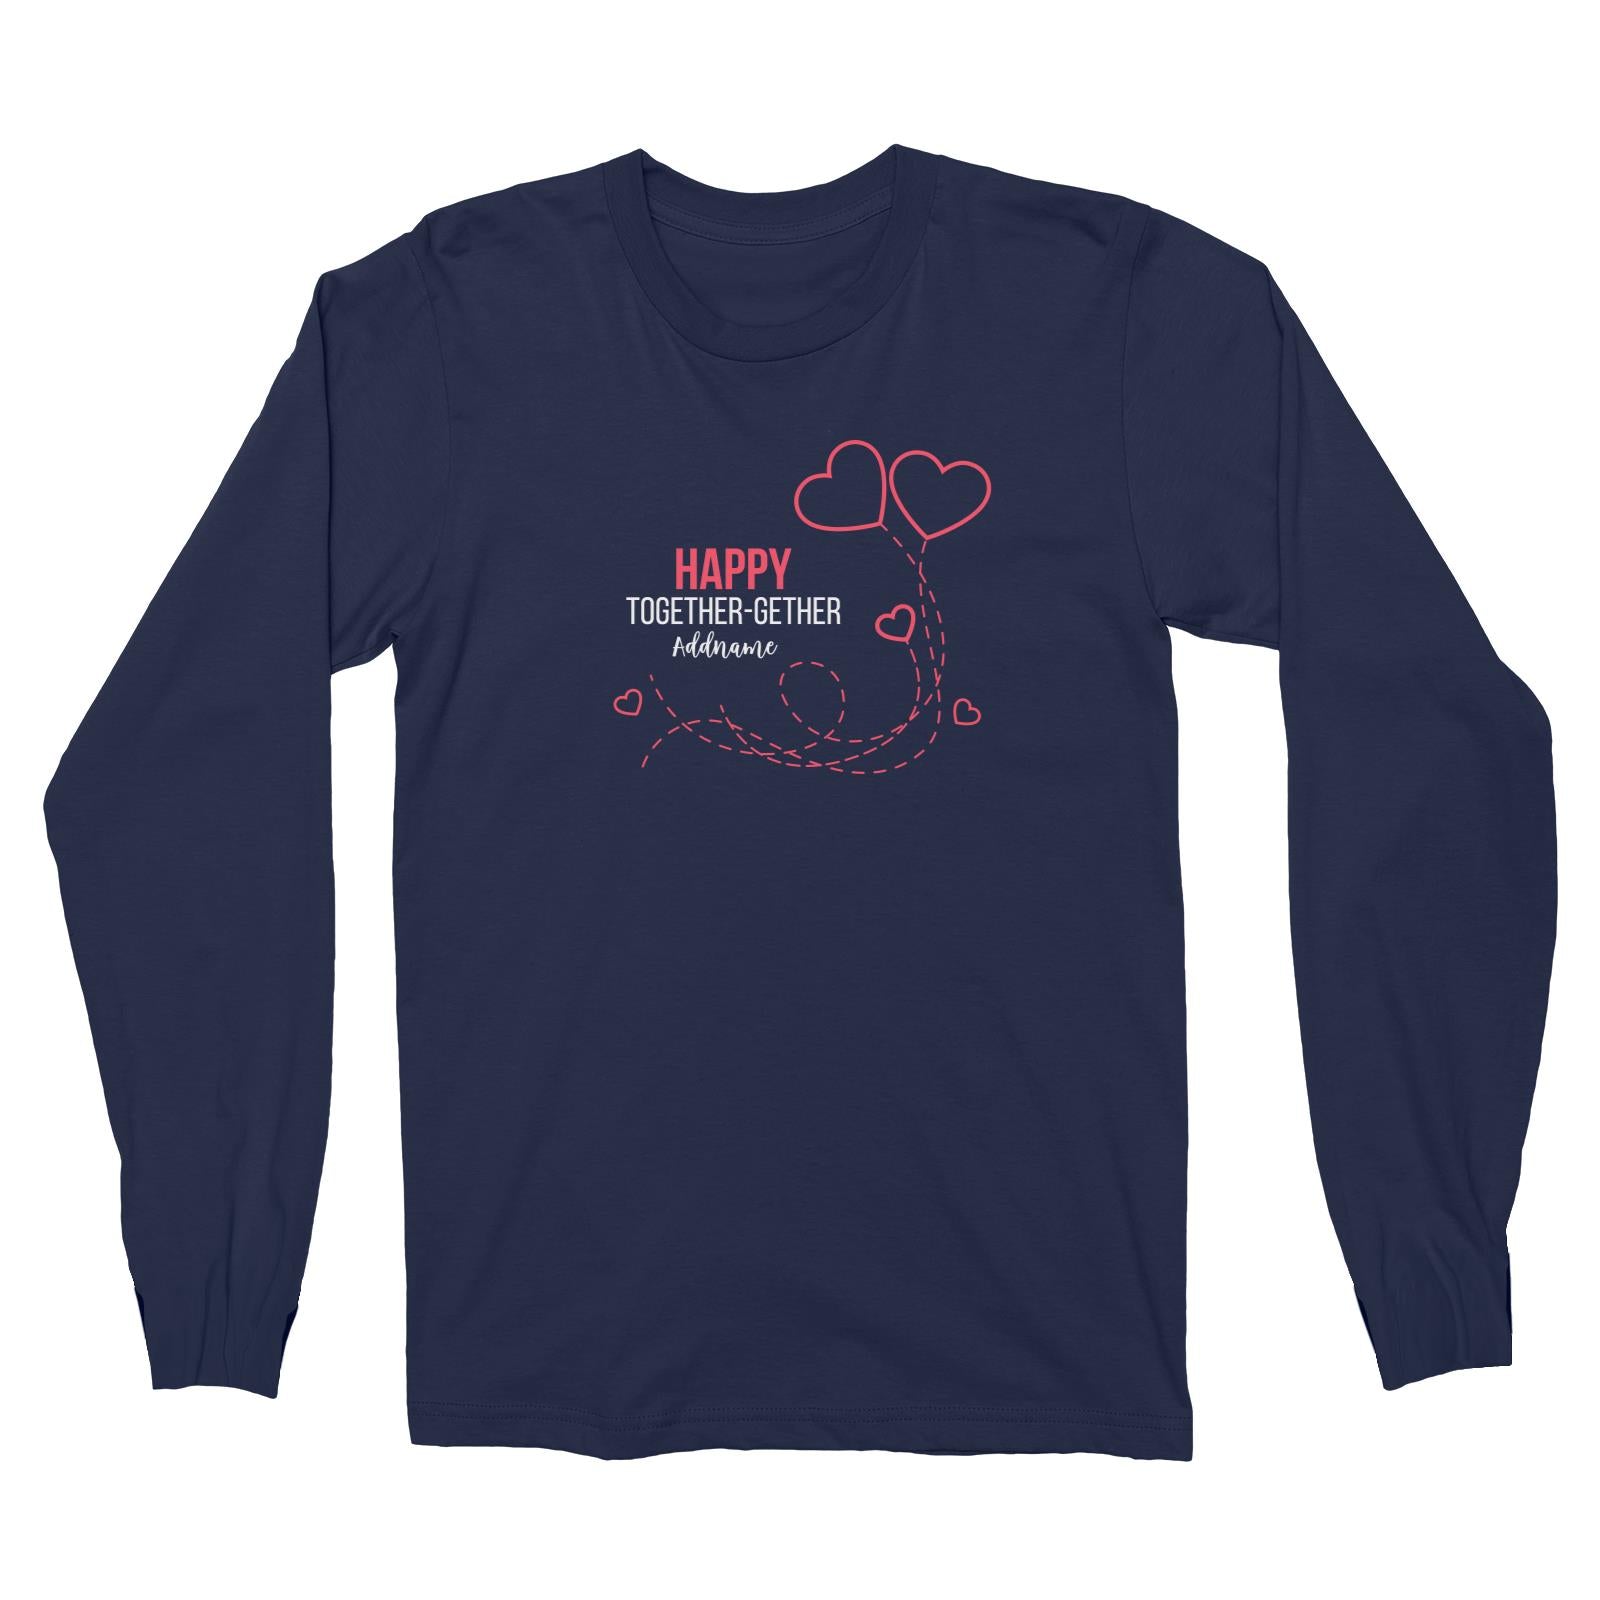 Happy Together Gether with Hearts Long Sleeve Unisex T-Shirt